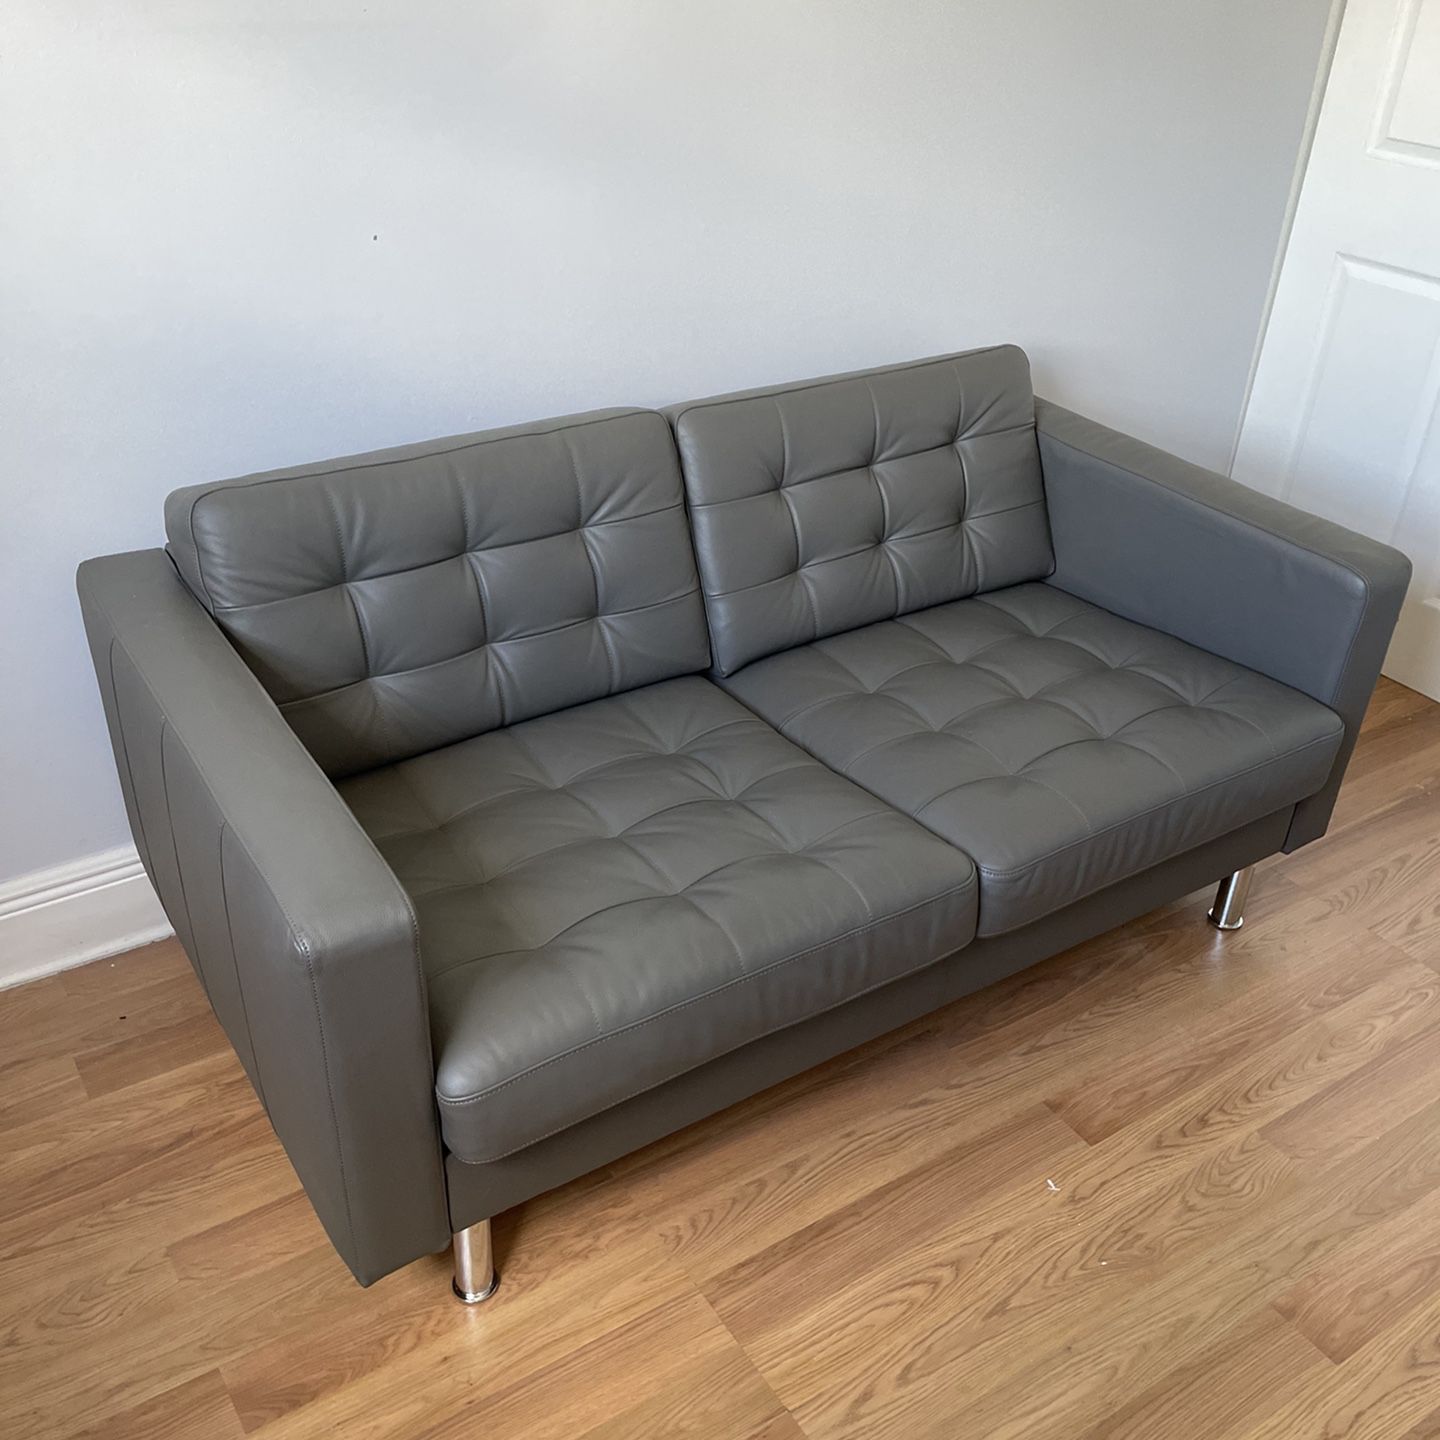 Gray Leather Couch - IKEA Morabo for Sale in Miami, FL -